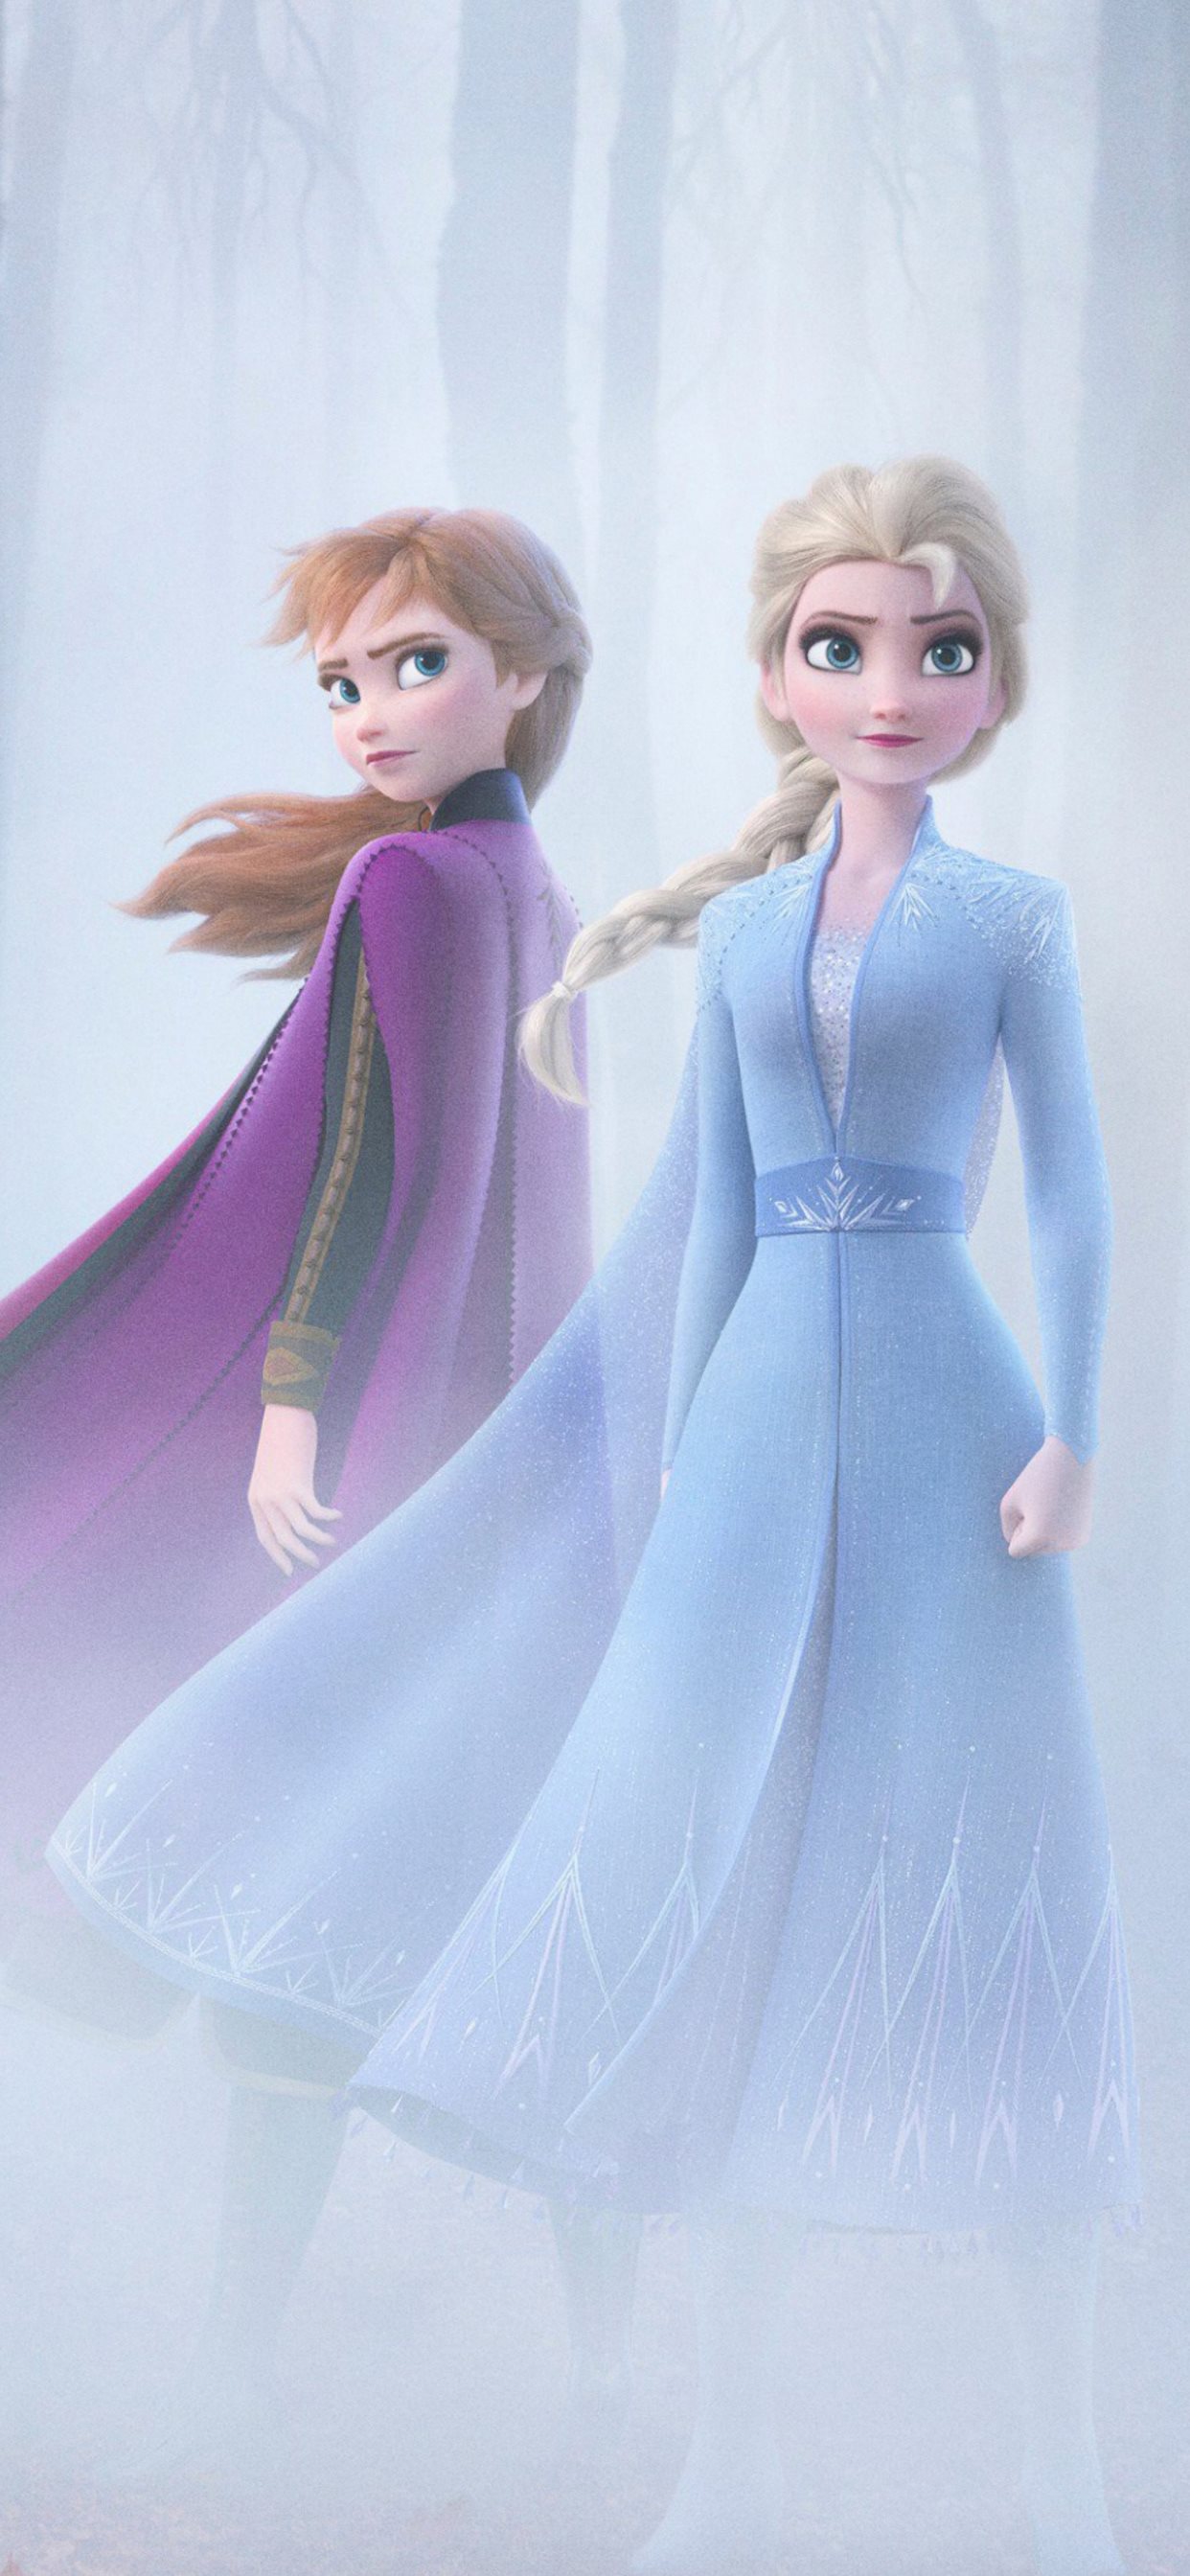 Anna And Elsa In Frozen 2 4k Iphone X Wallpapers Free Download